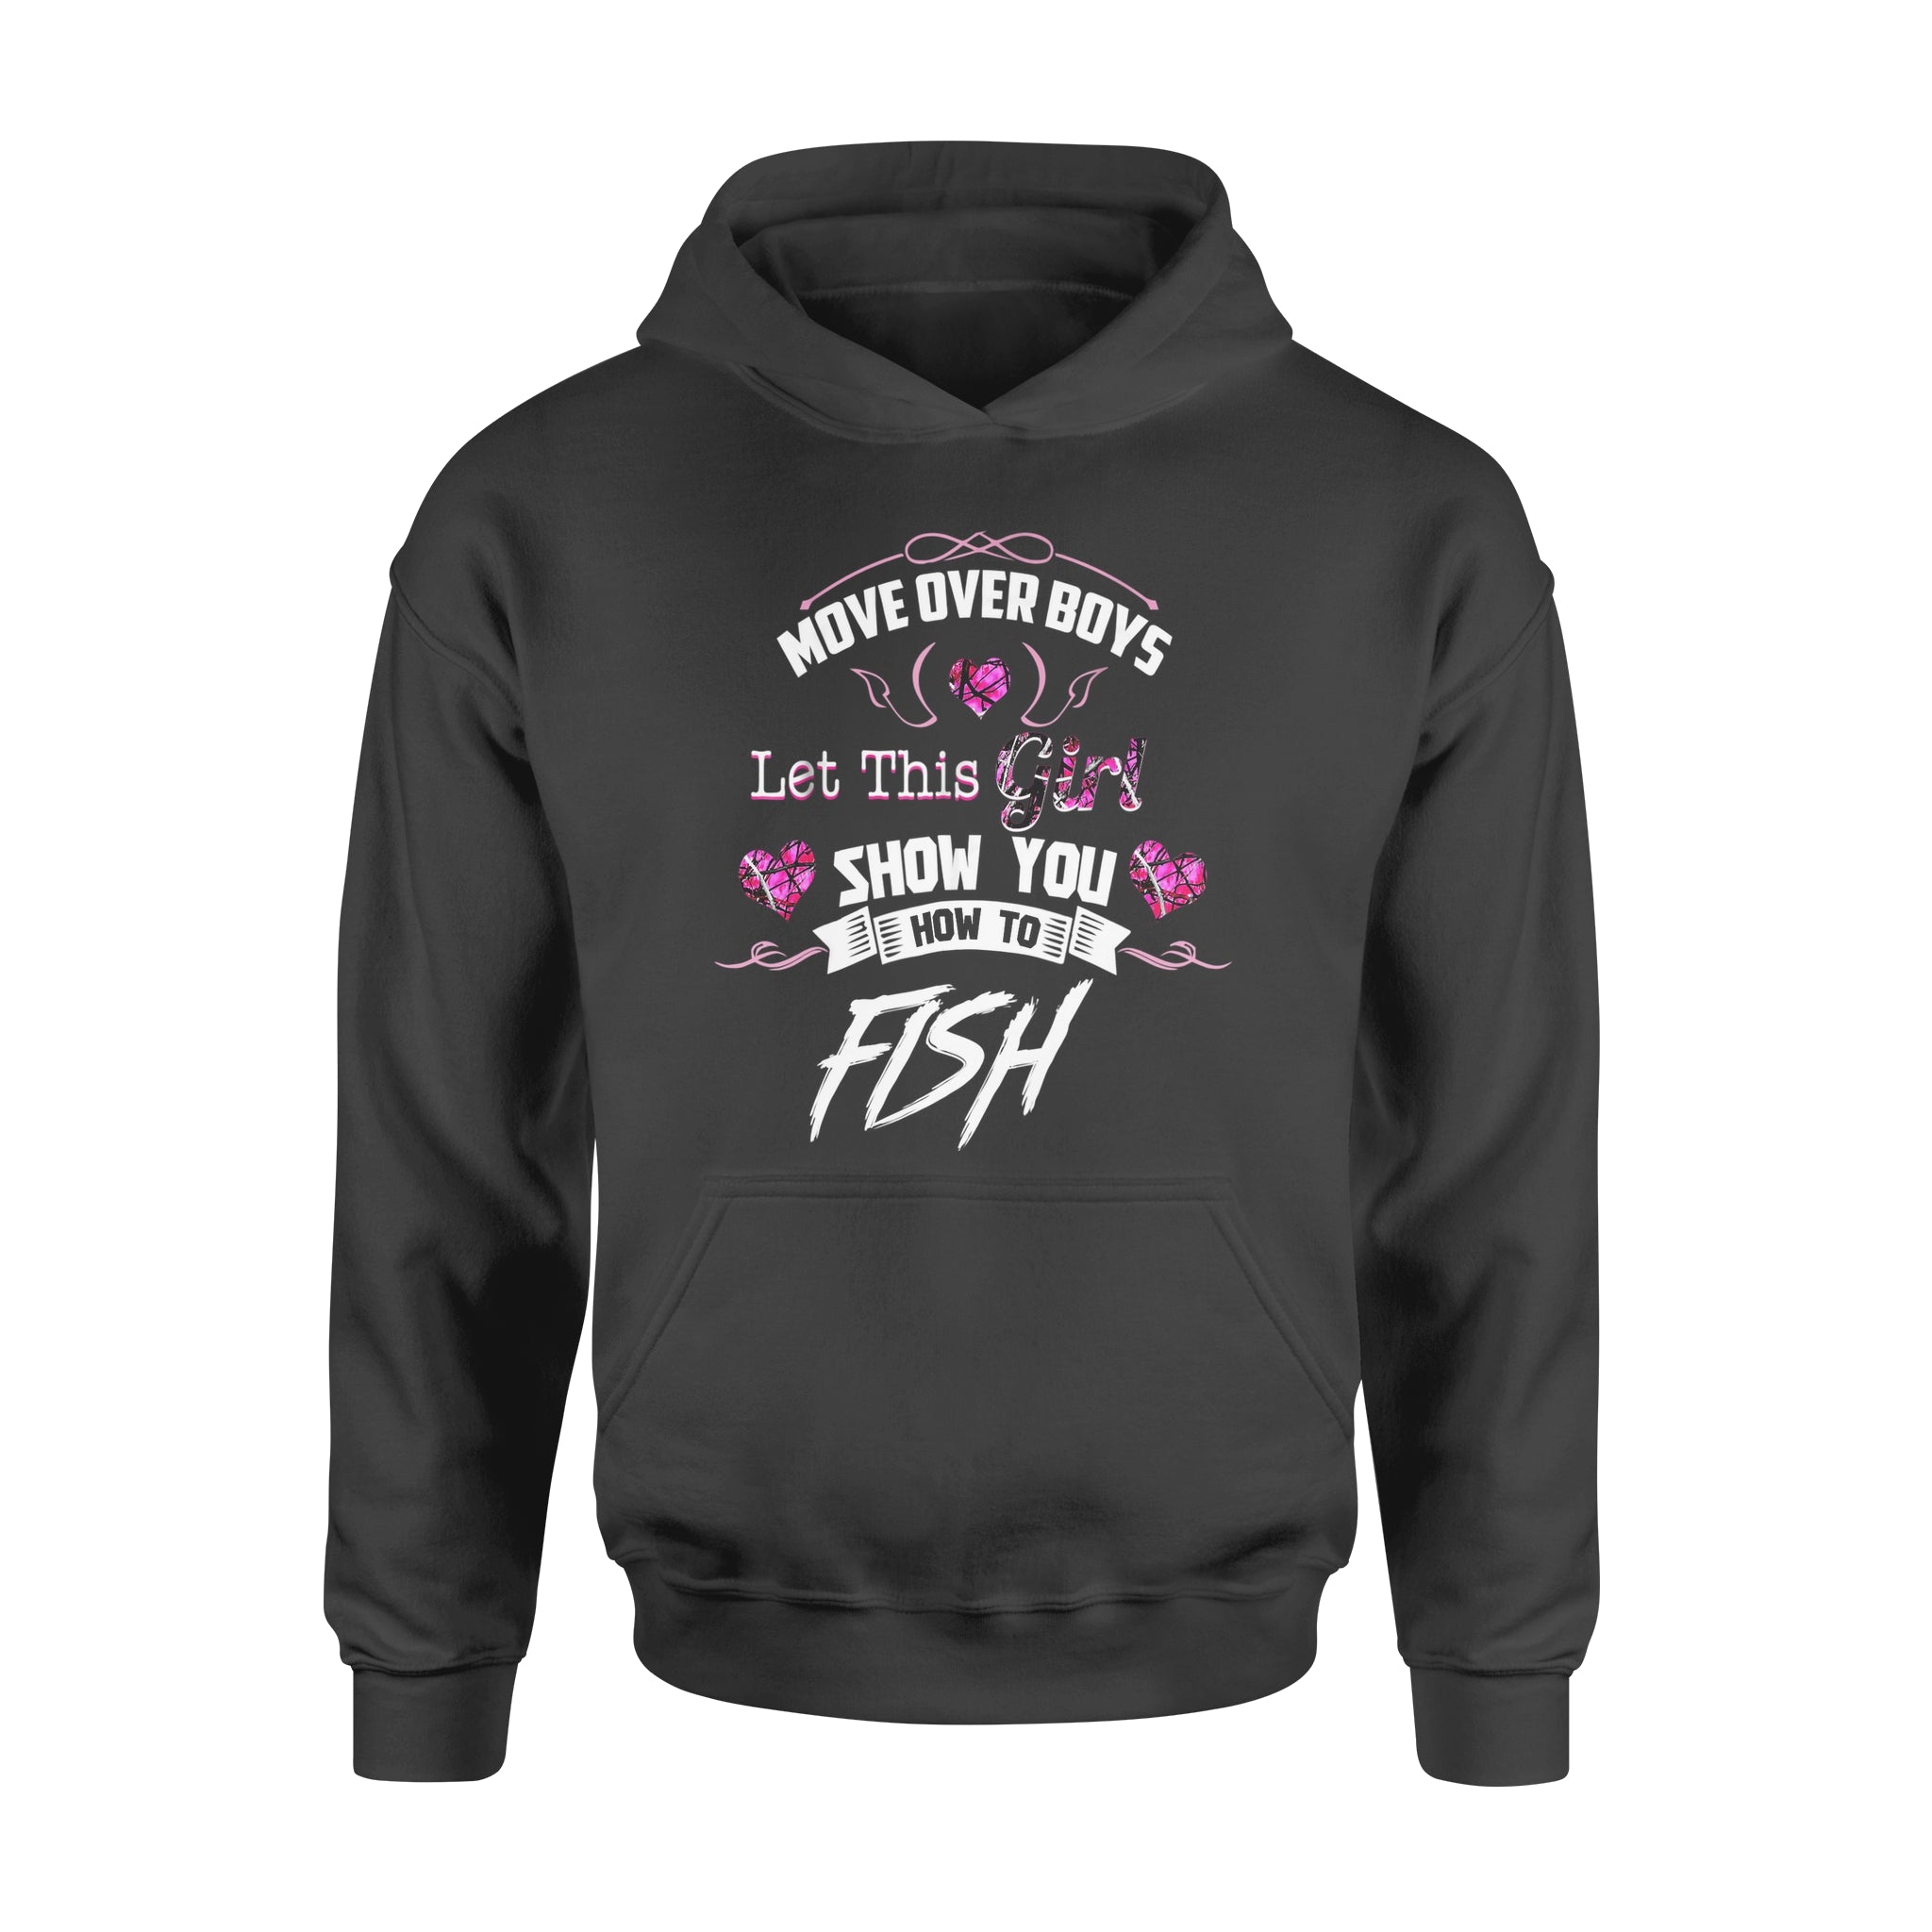 Fishing Shirts For Girls - Move Over Boys let this girl show you how to fish D05 NQSD312 - Standard Hoodie